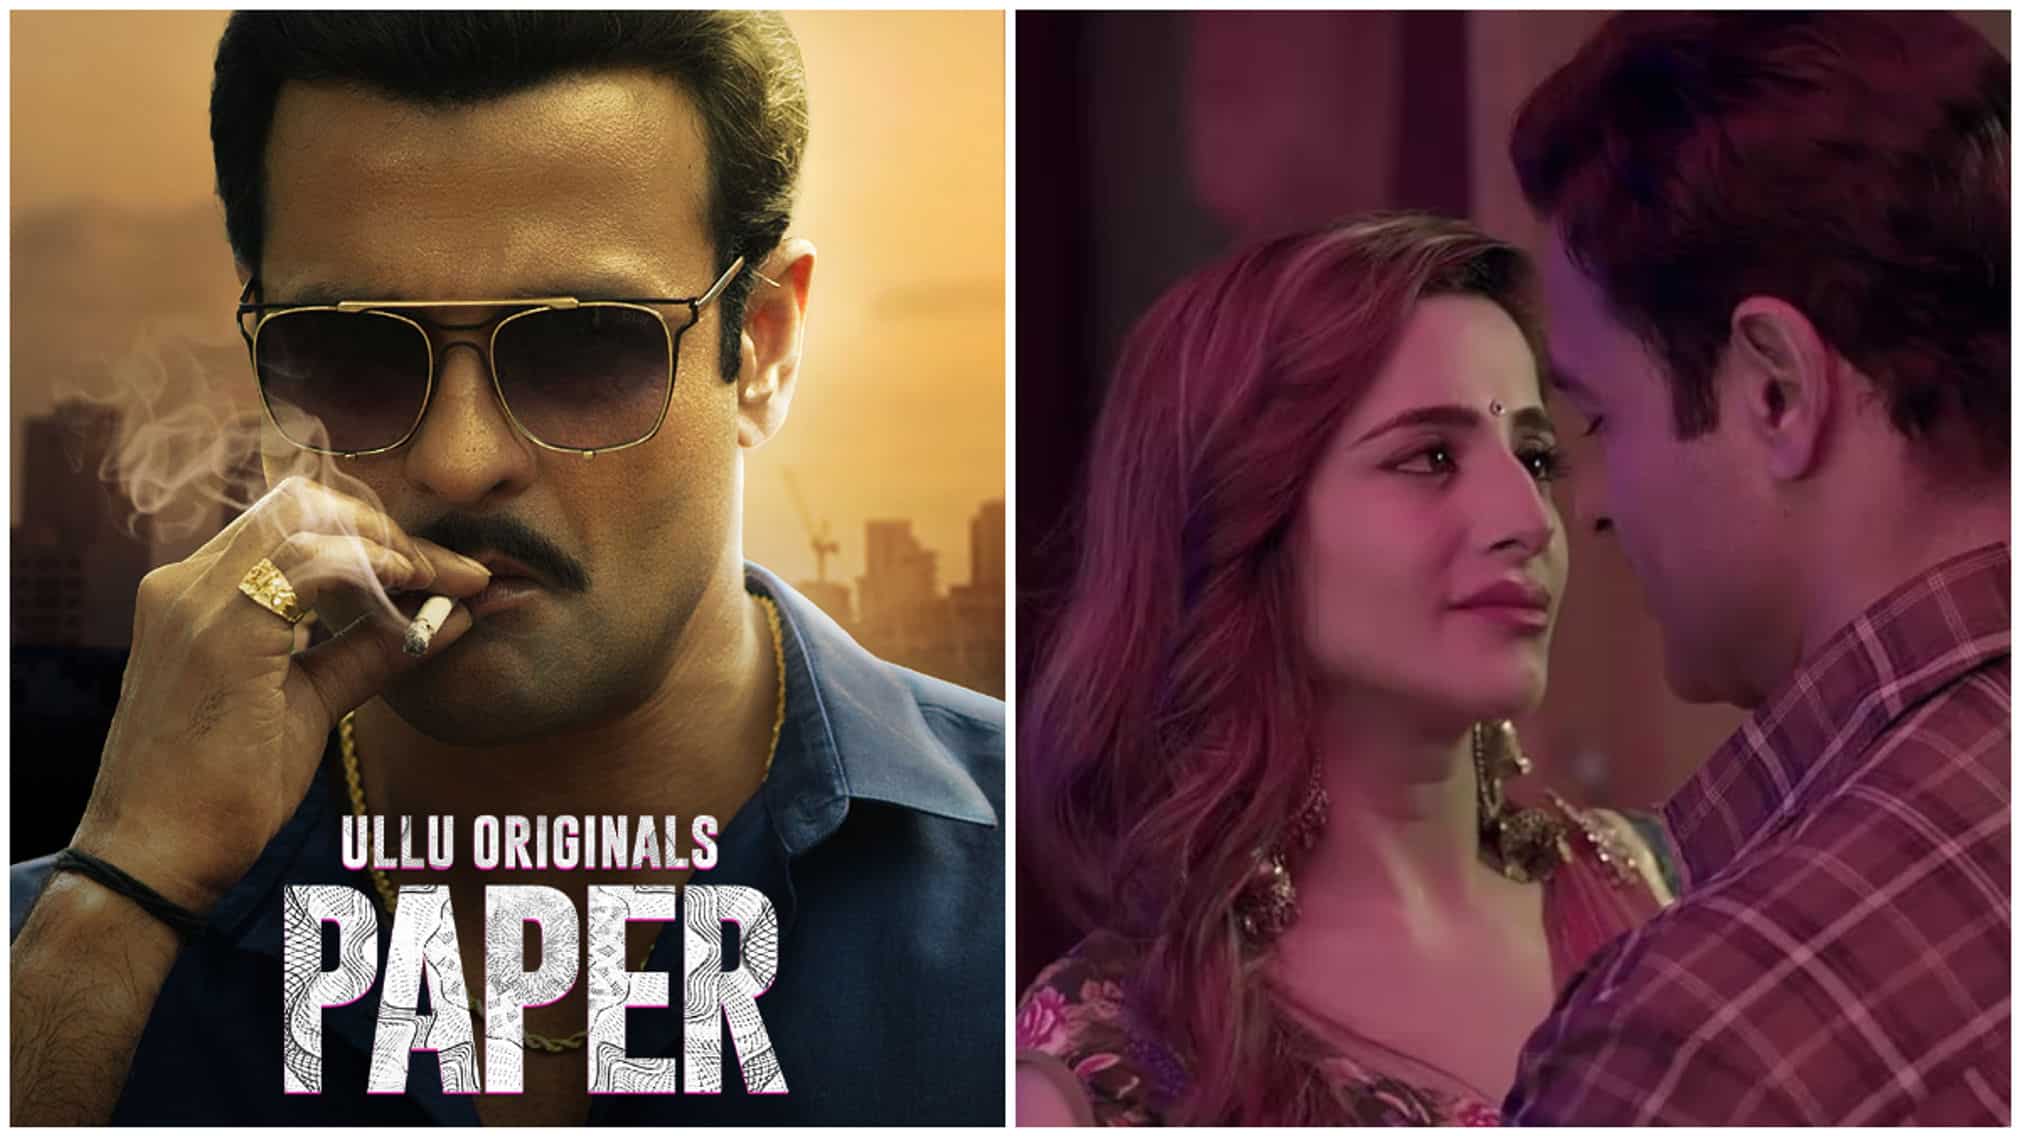 Paper - Rohit Roy's Ullu series delves into the dark world of crime